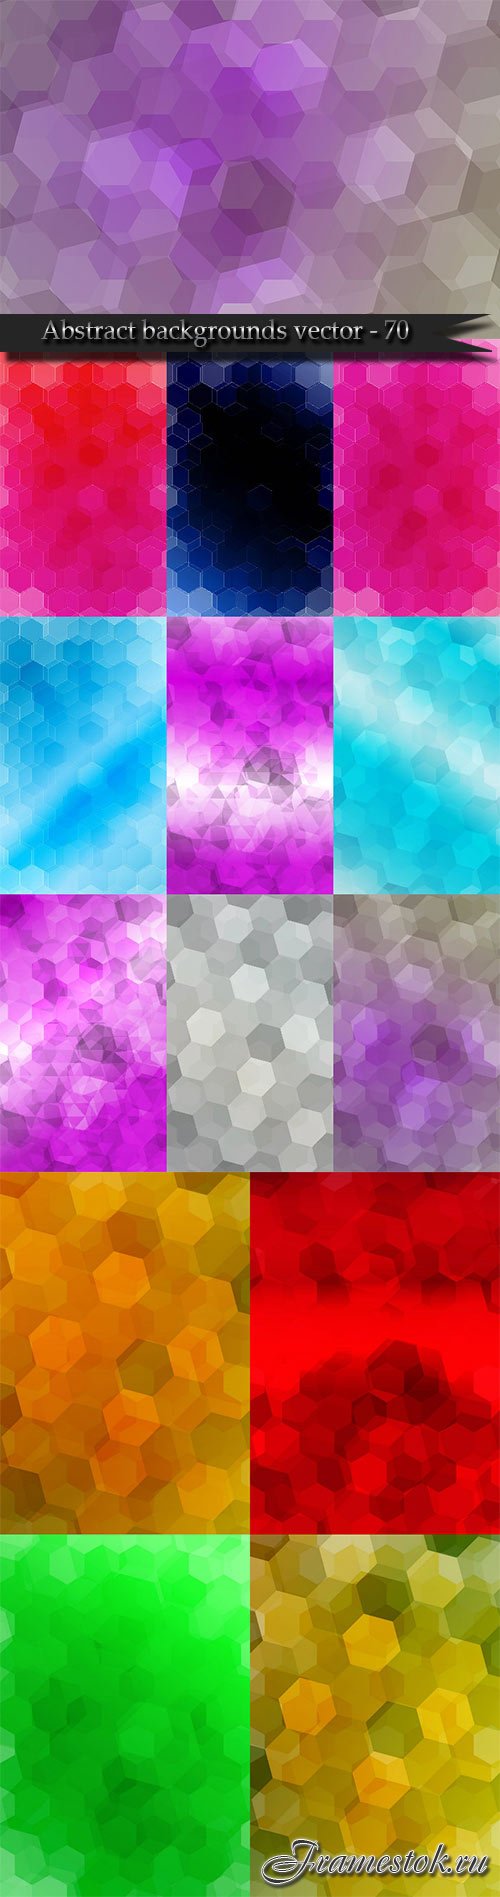 Bright colorful abstract backgrounds vector - 70